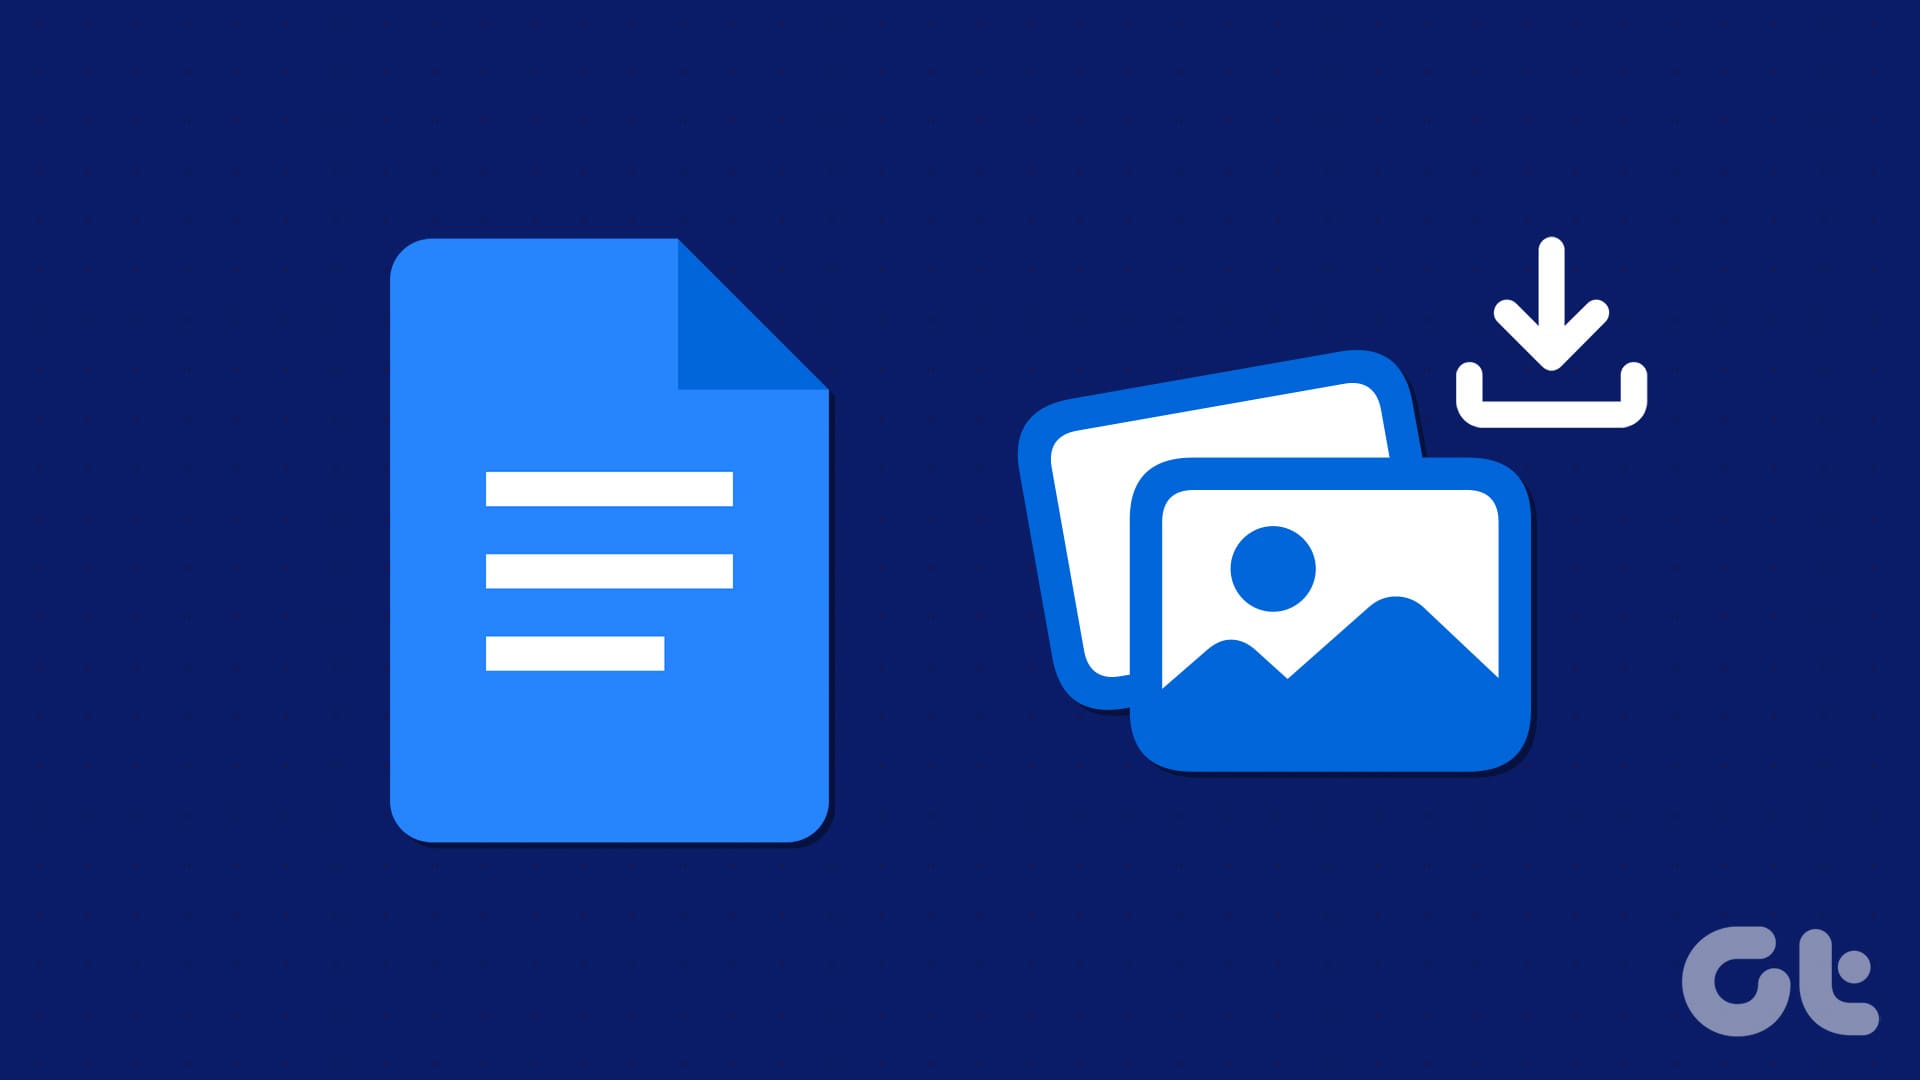 Download and Save Images from Google Docs